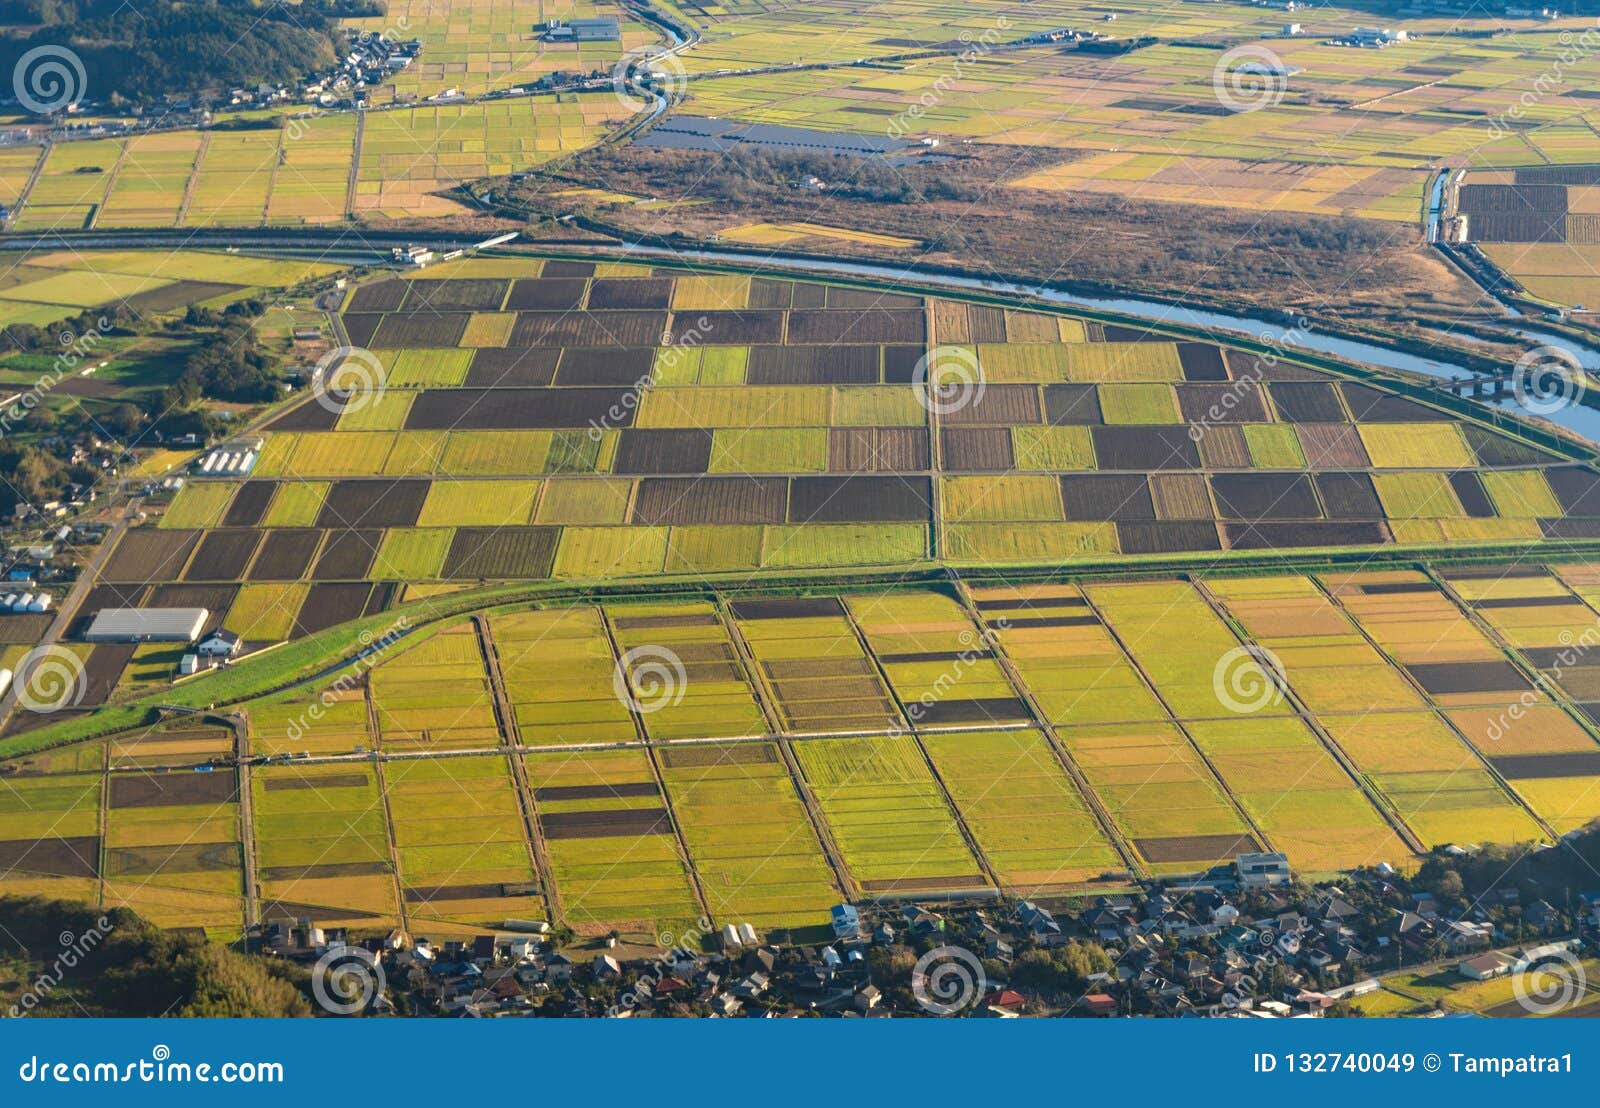 Aerial View Of Agricultural Fields In Countryside Of Japan In Sp Stock Image Image Of Cultivated Ground